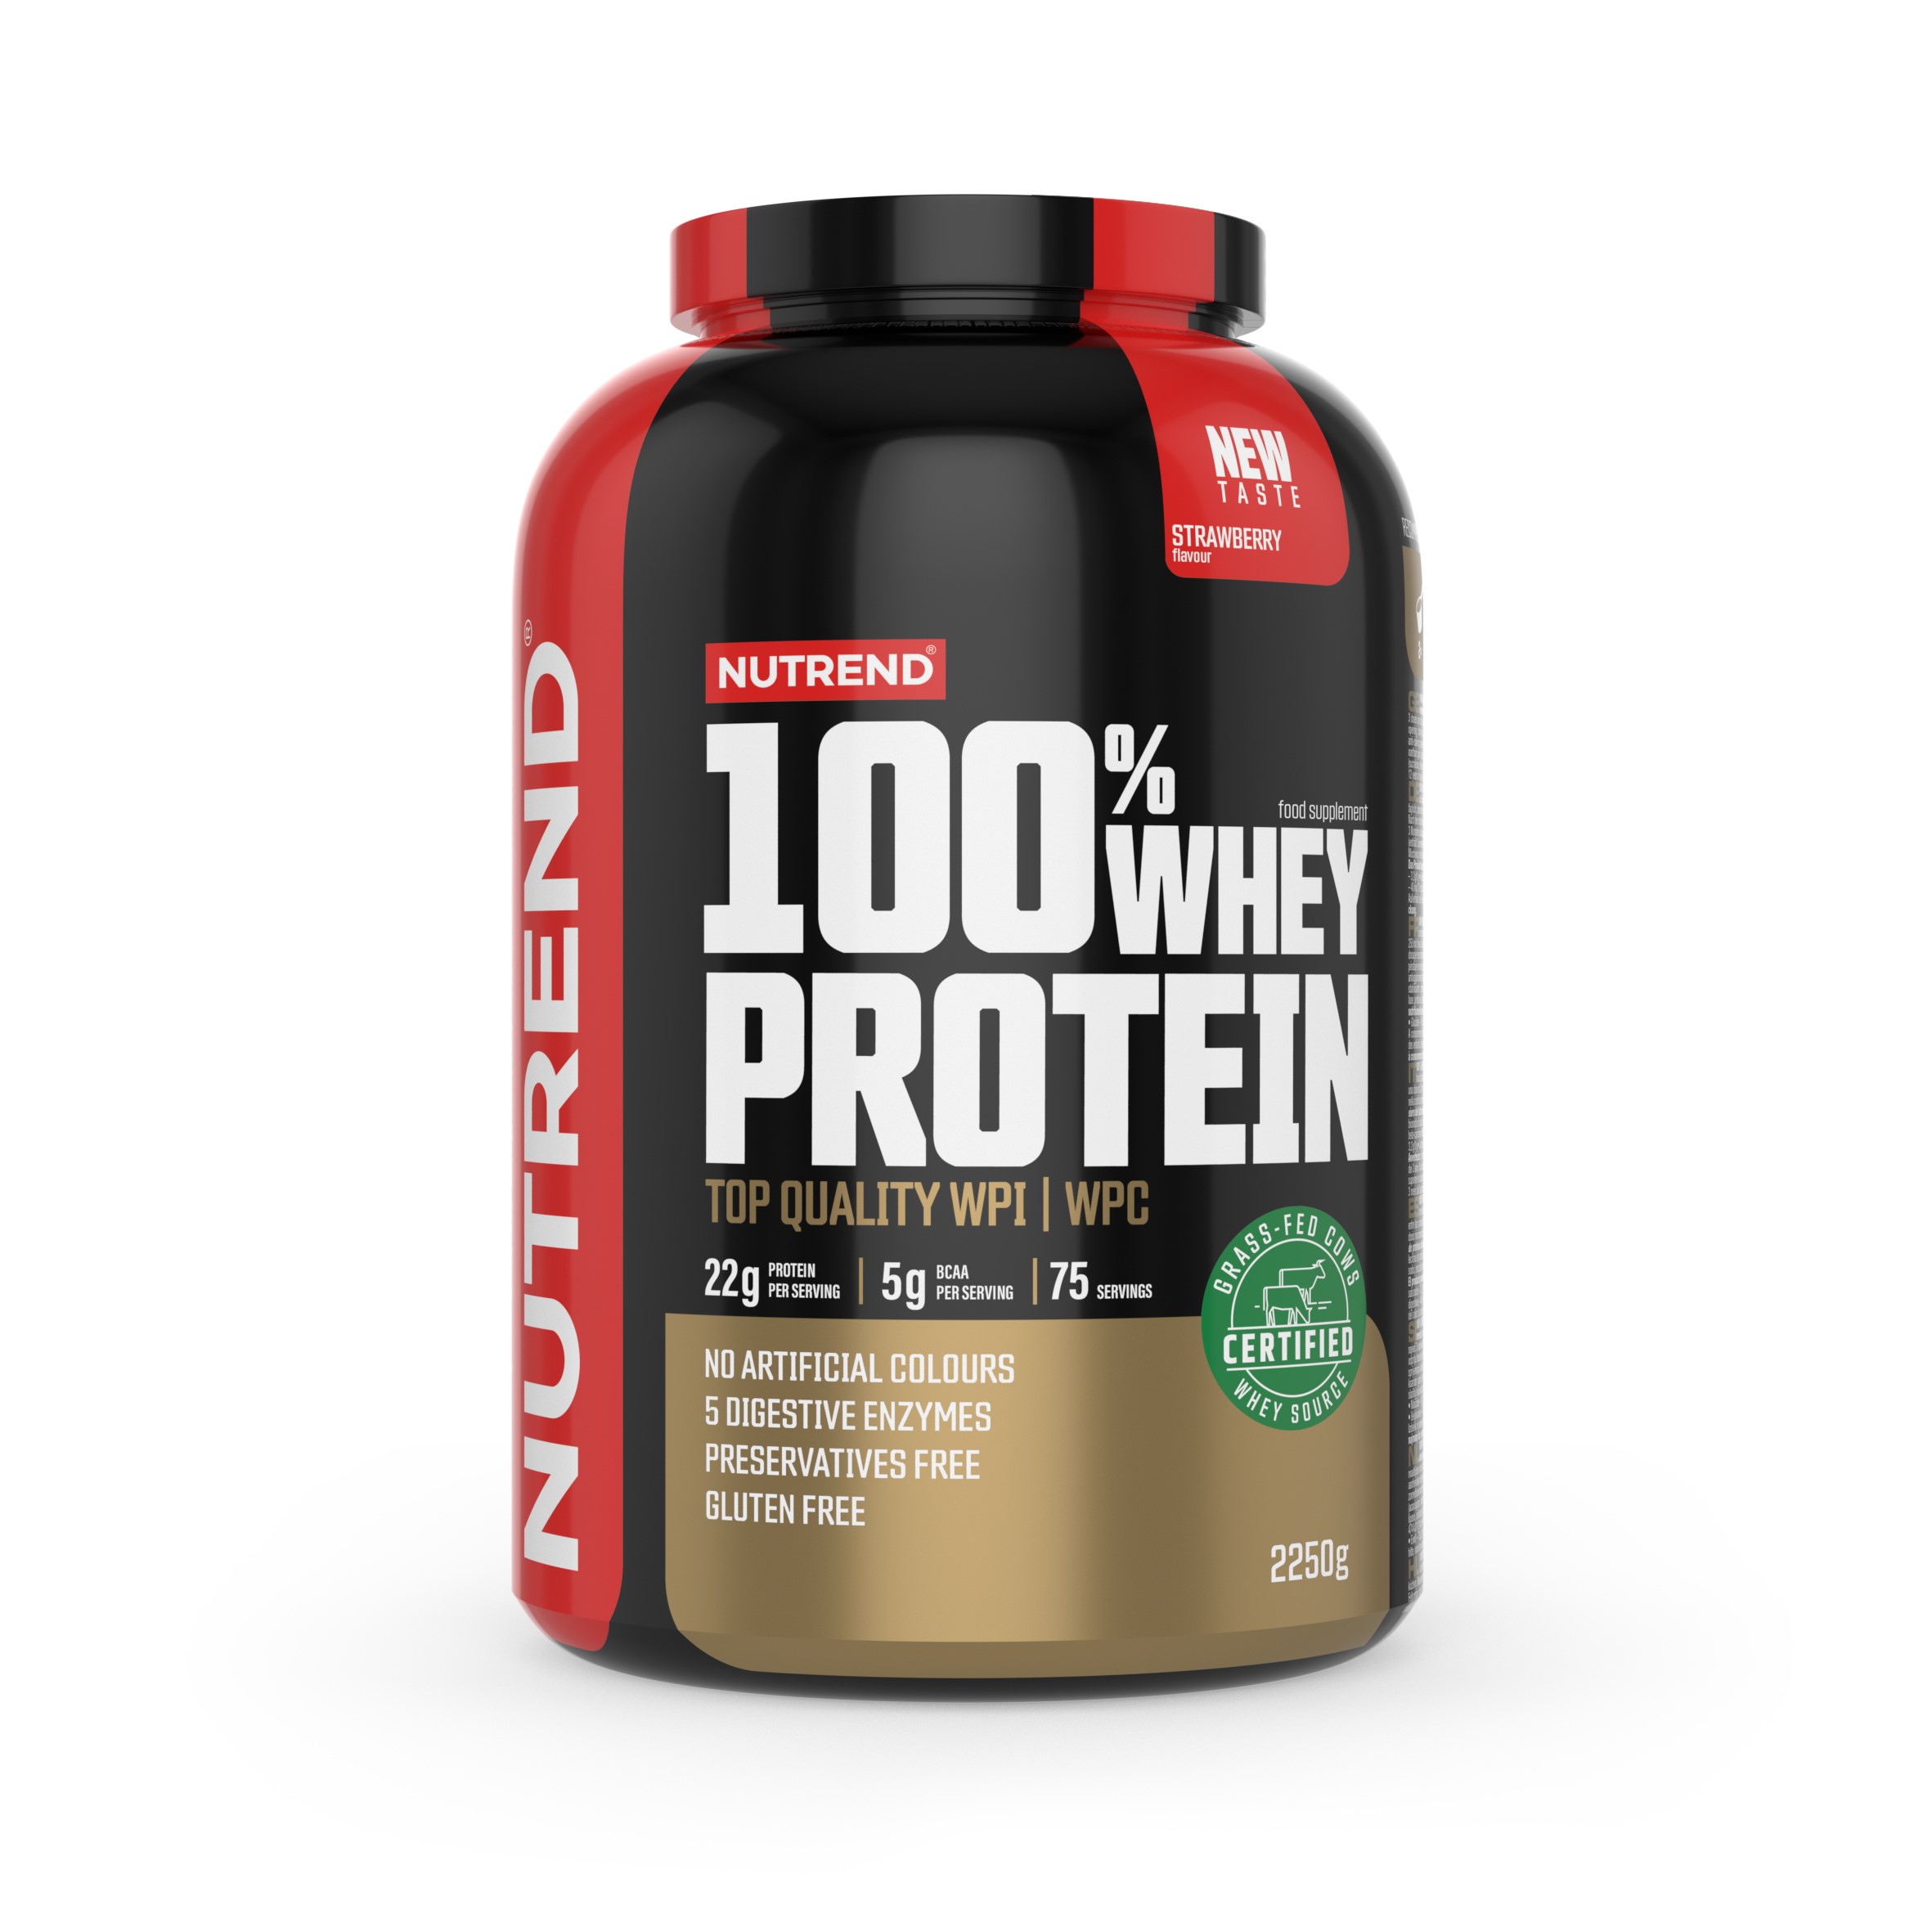 Concentrate Proteice - 100% WHEY PROTEIN 2.25 kg Strawberry, advancednutrition.ro